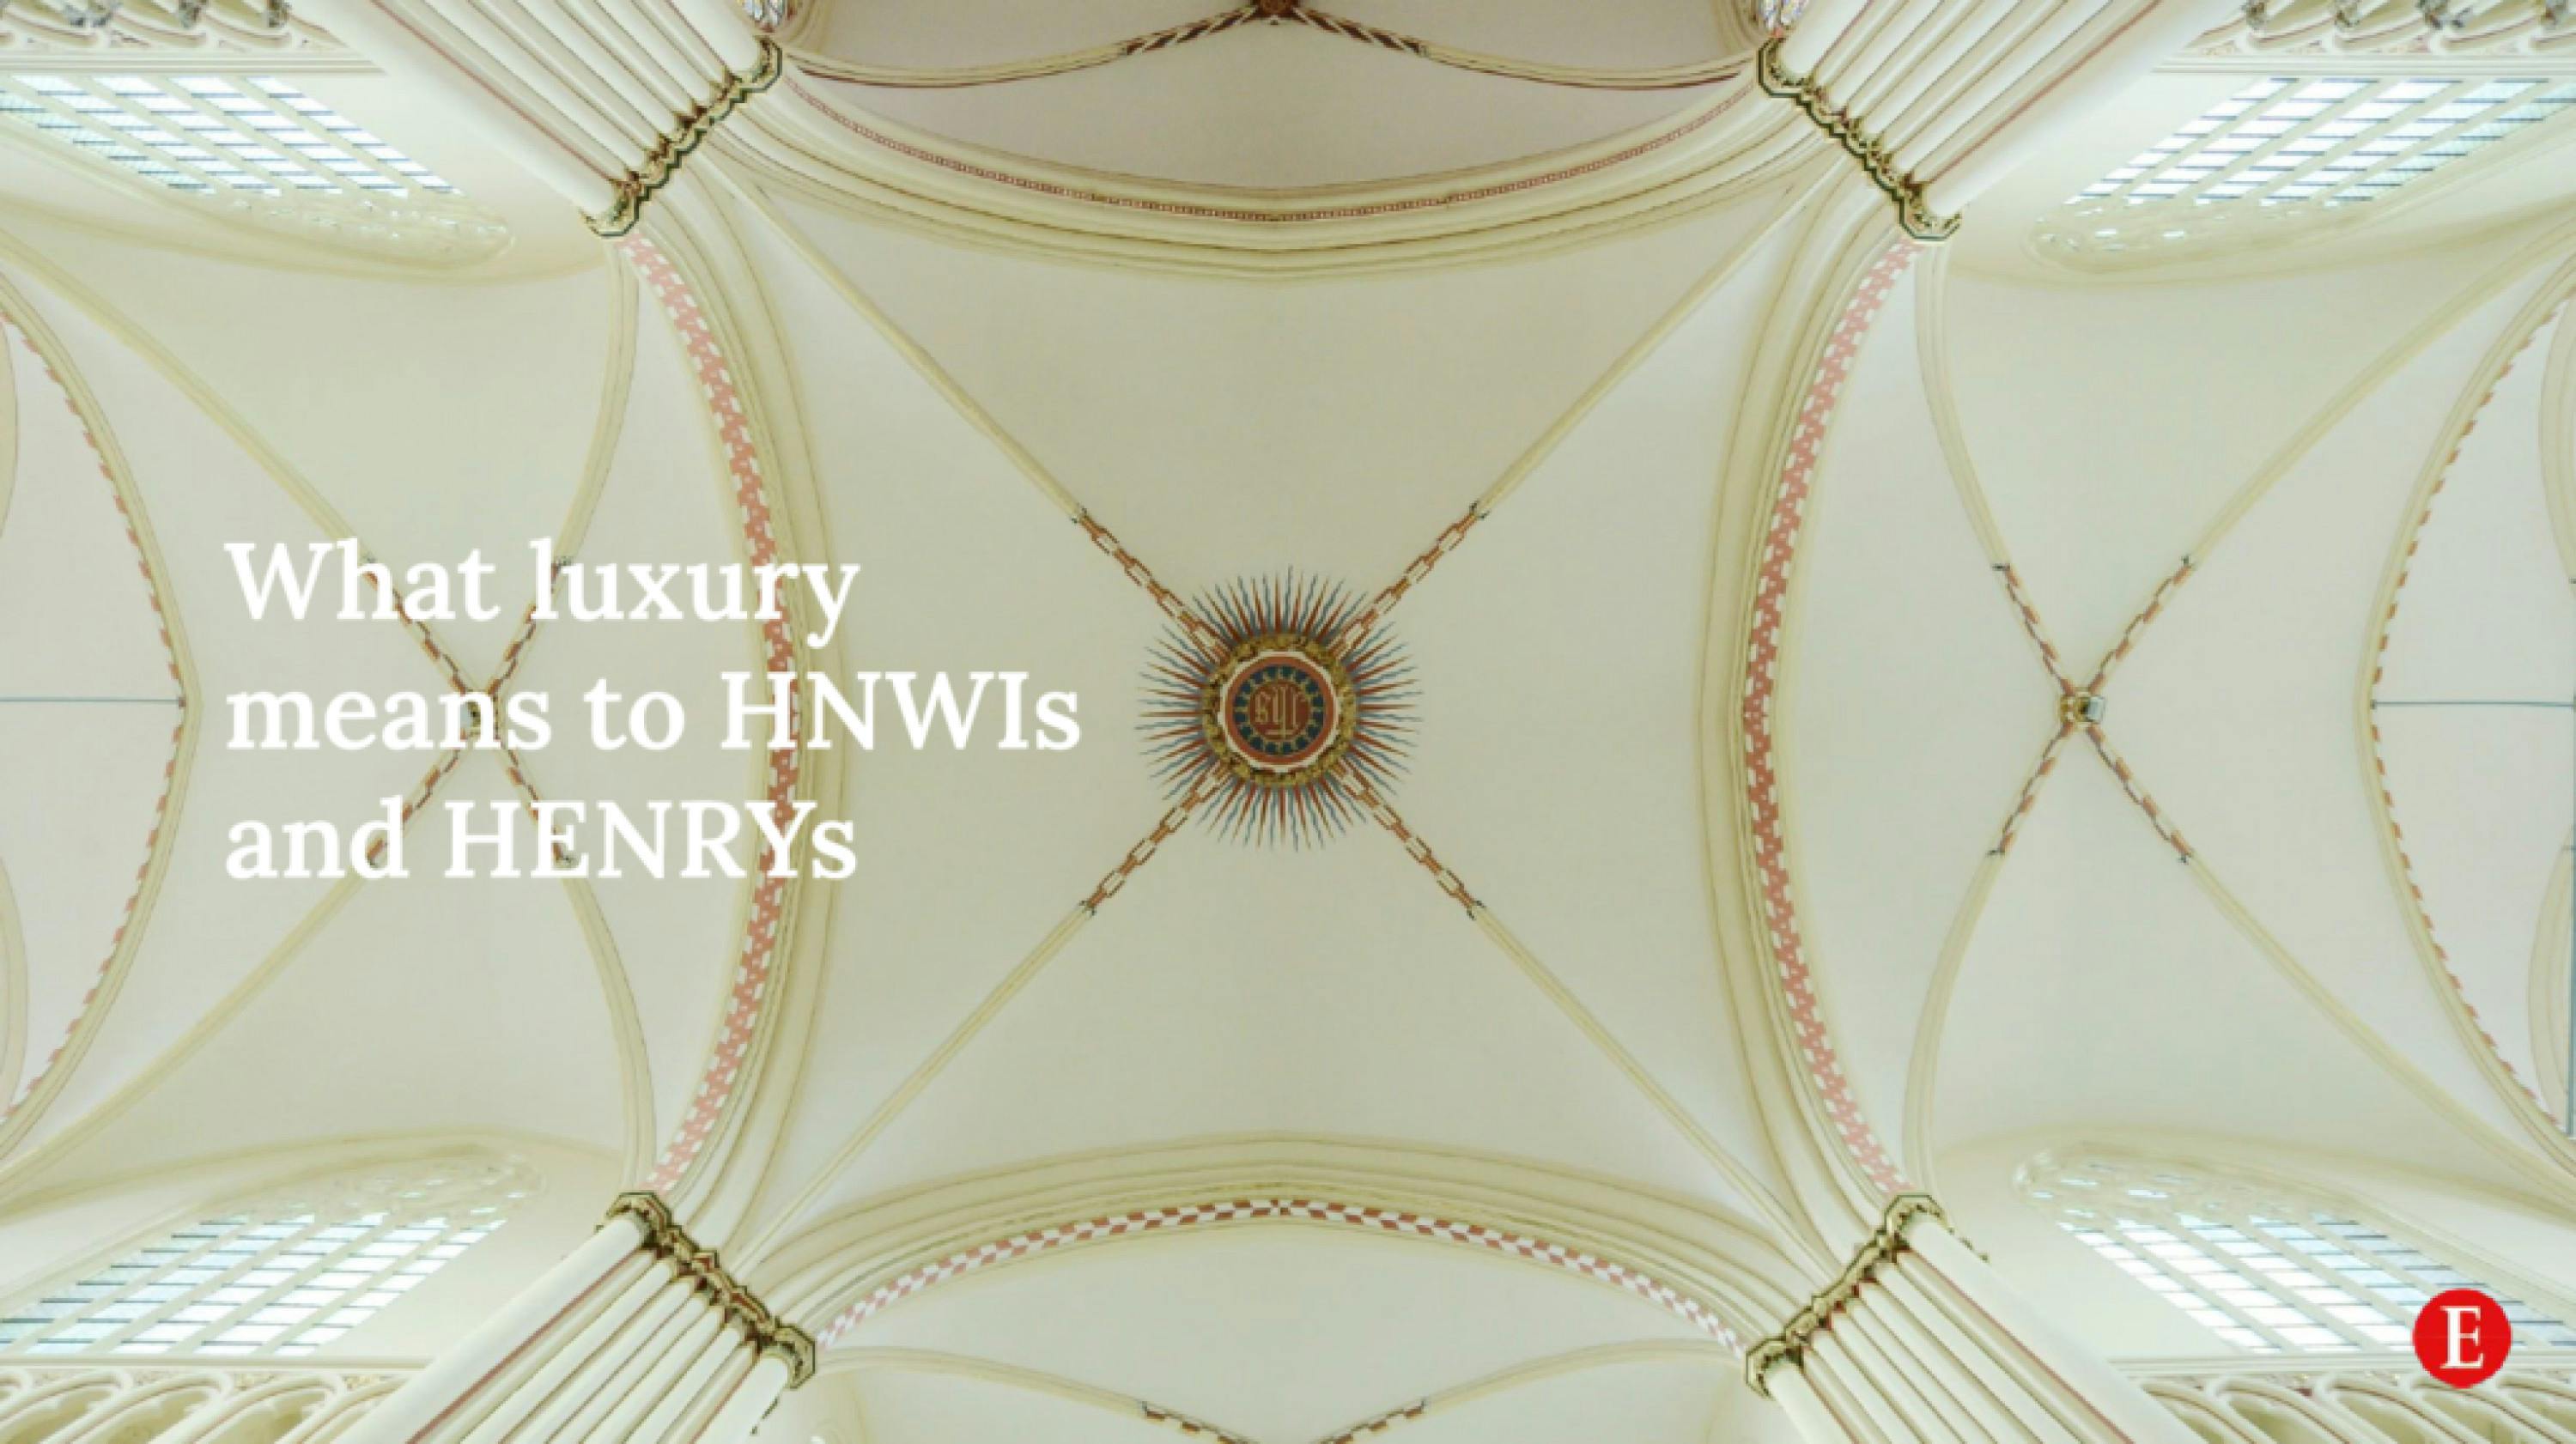 WALPOLE WEBINAR: Are HENRYs taking a new approach to luxury? Is Covid-19 changing attitudes?